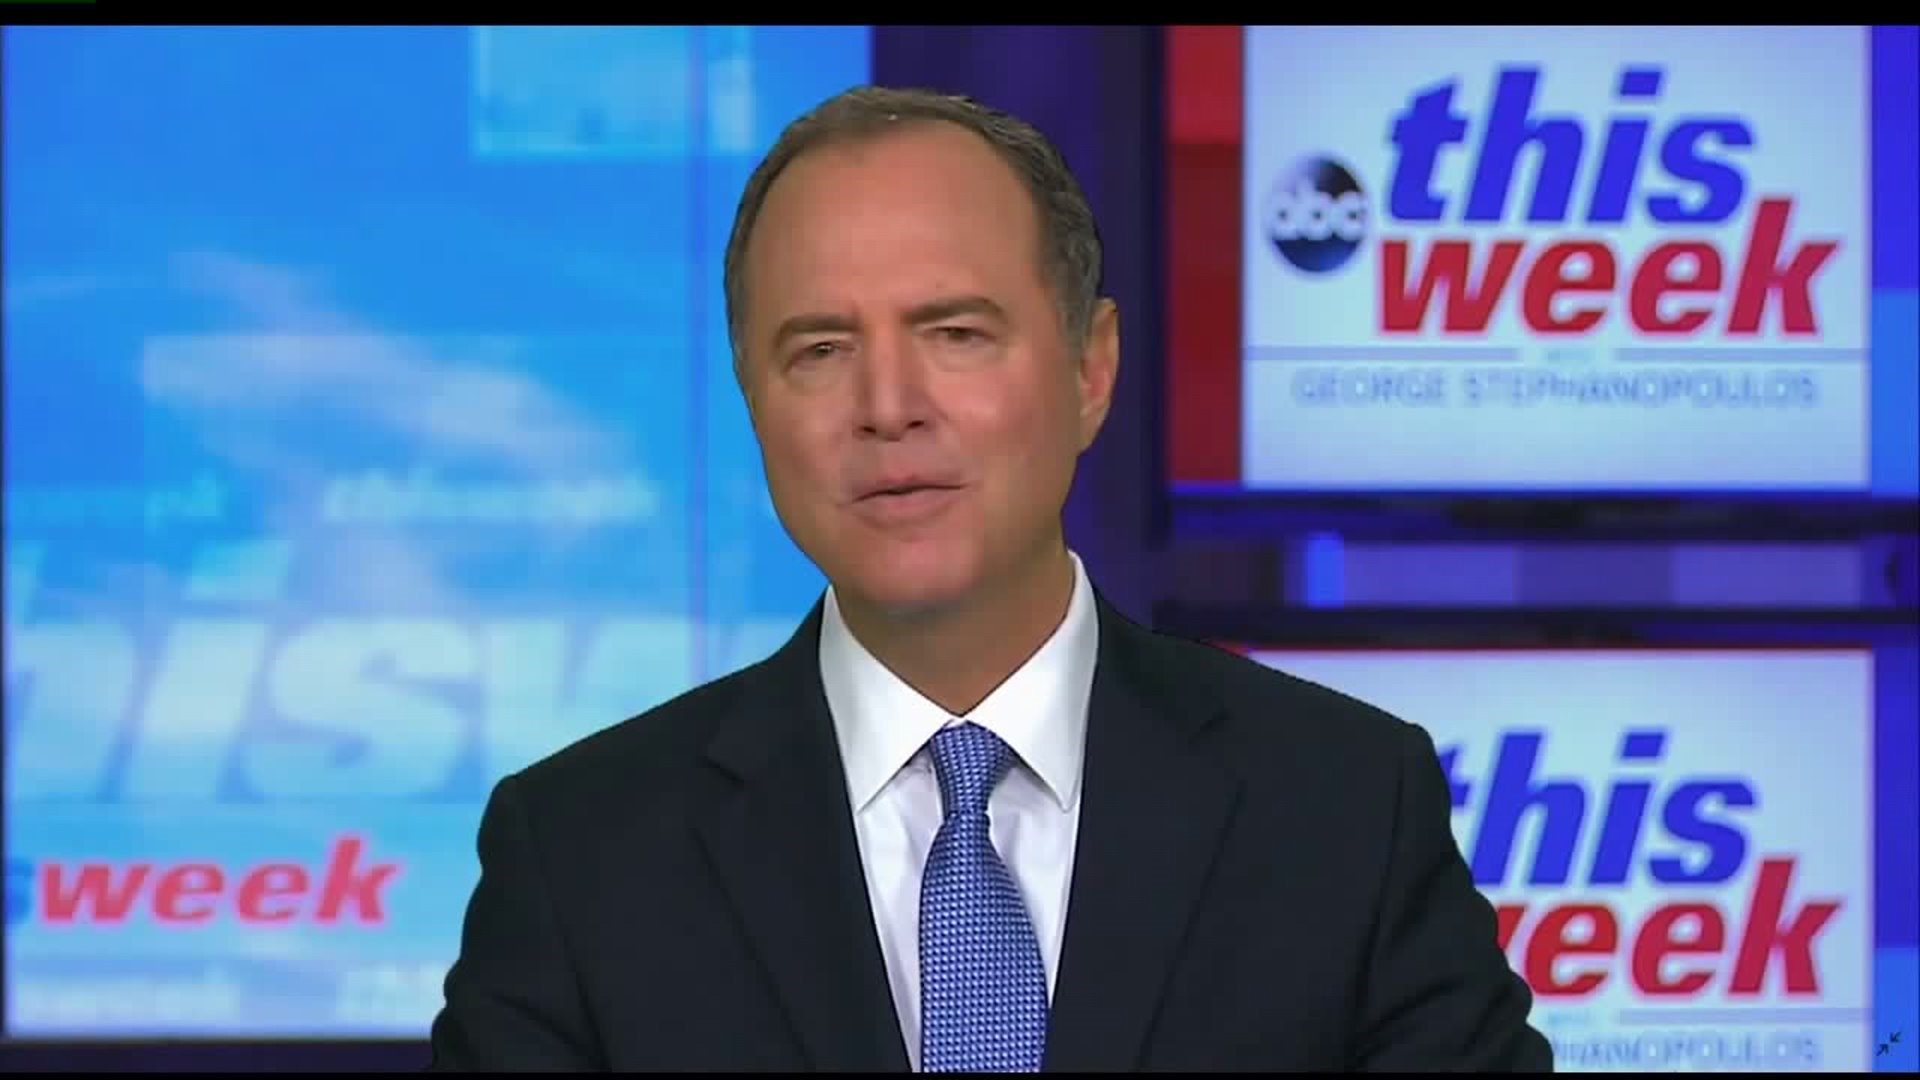 Schiff confirms tentative agreement for whistleblower to testify before House Intelligence Committee